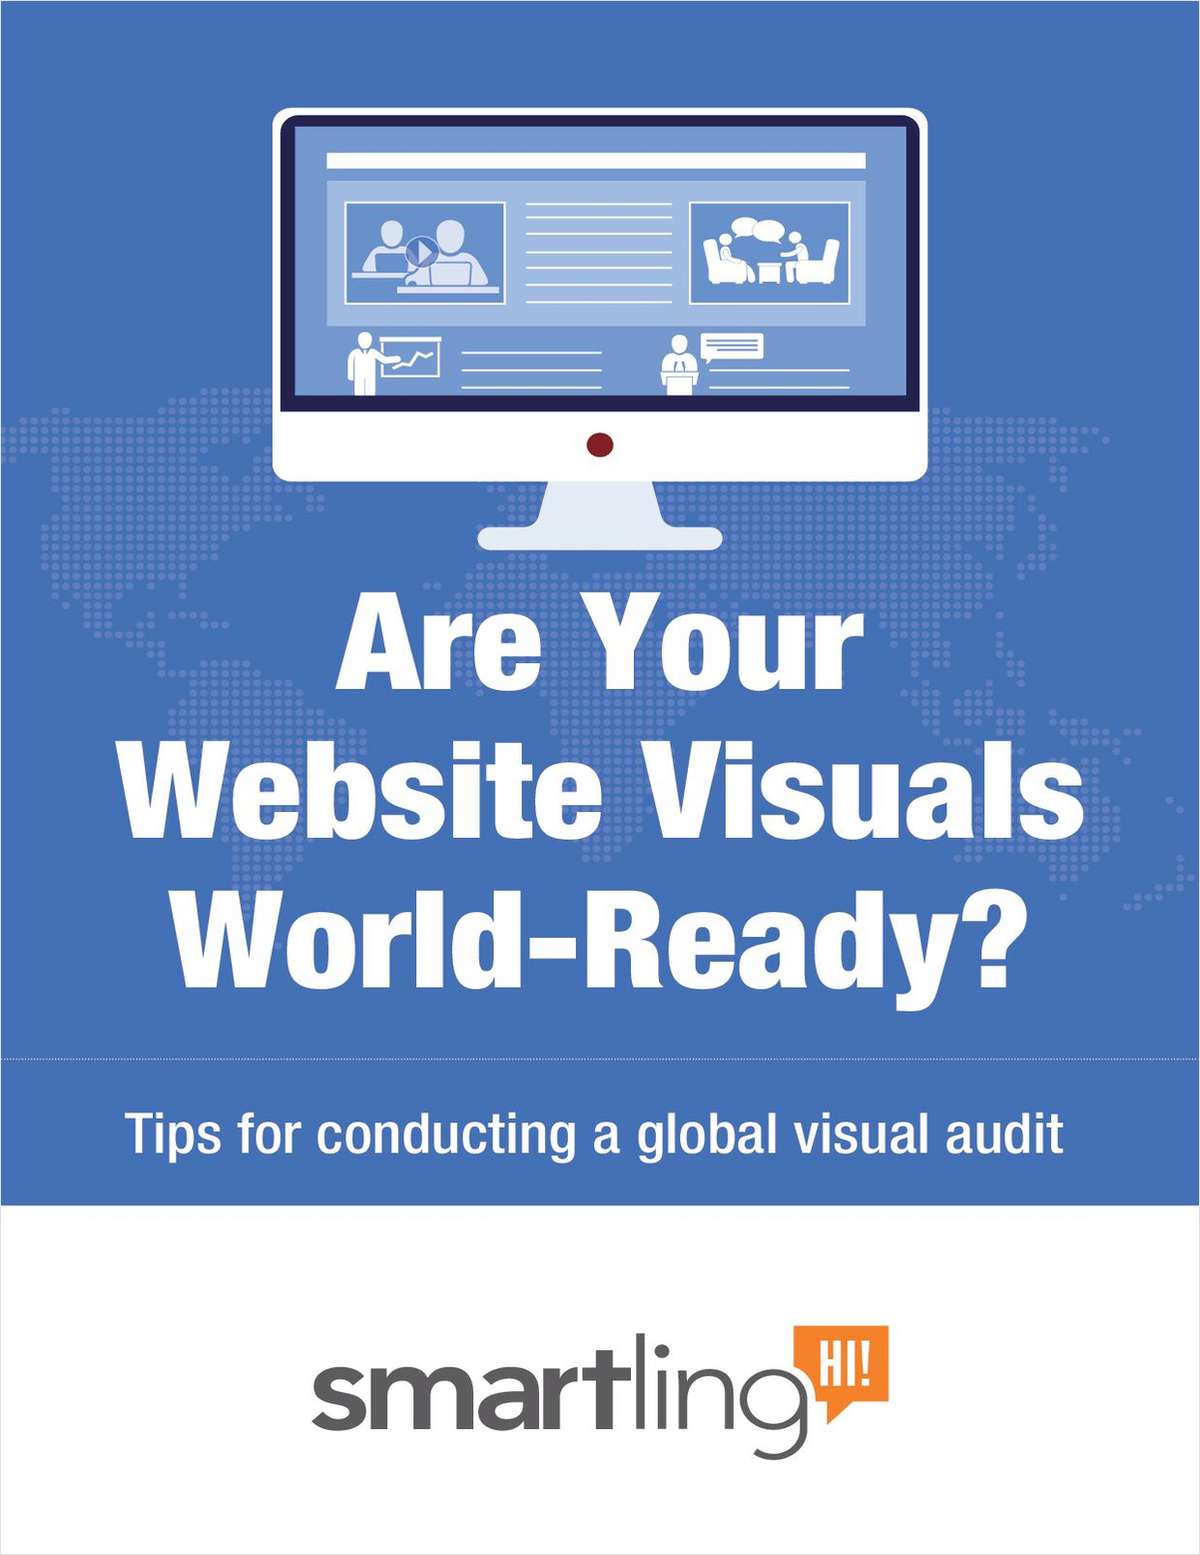 Are Your Website Visuals World-Ready?